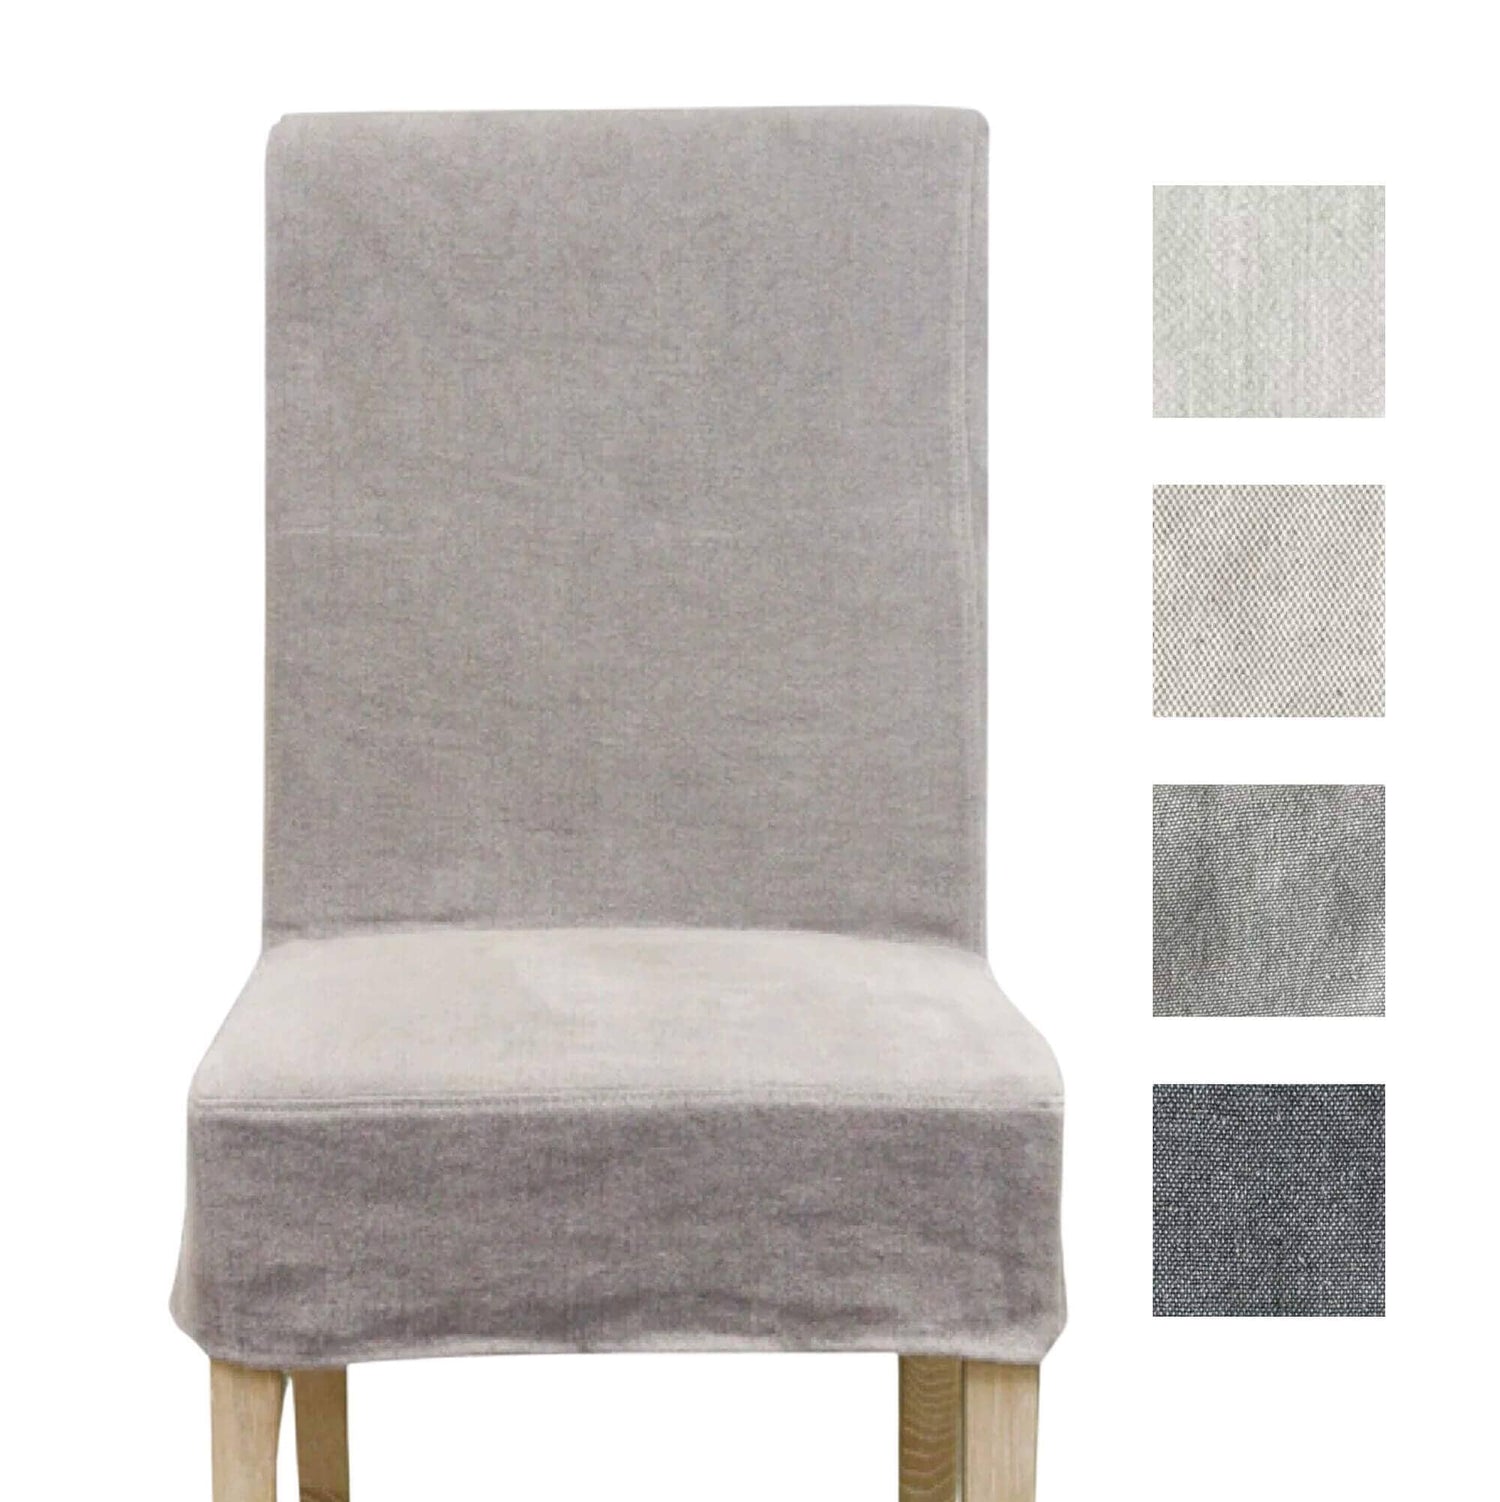 Collaroy High Back Chair Cover Dining Furniture Beachwood Designs Shale Linen 